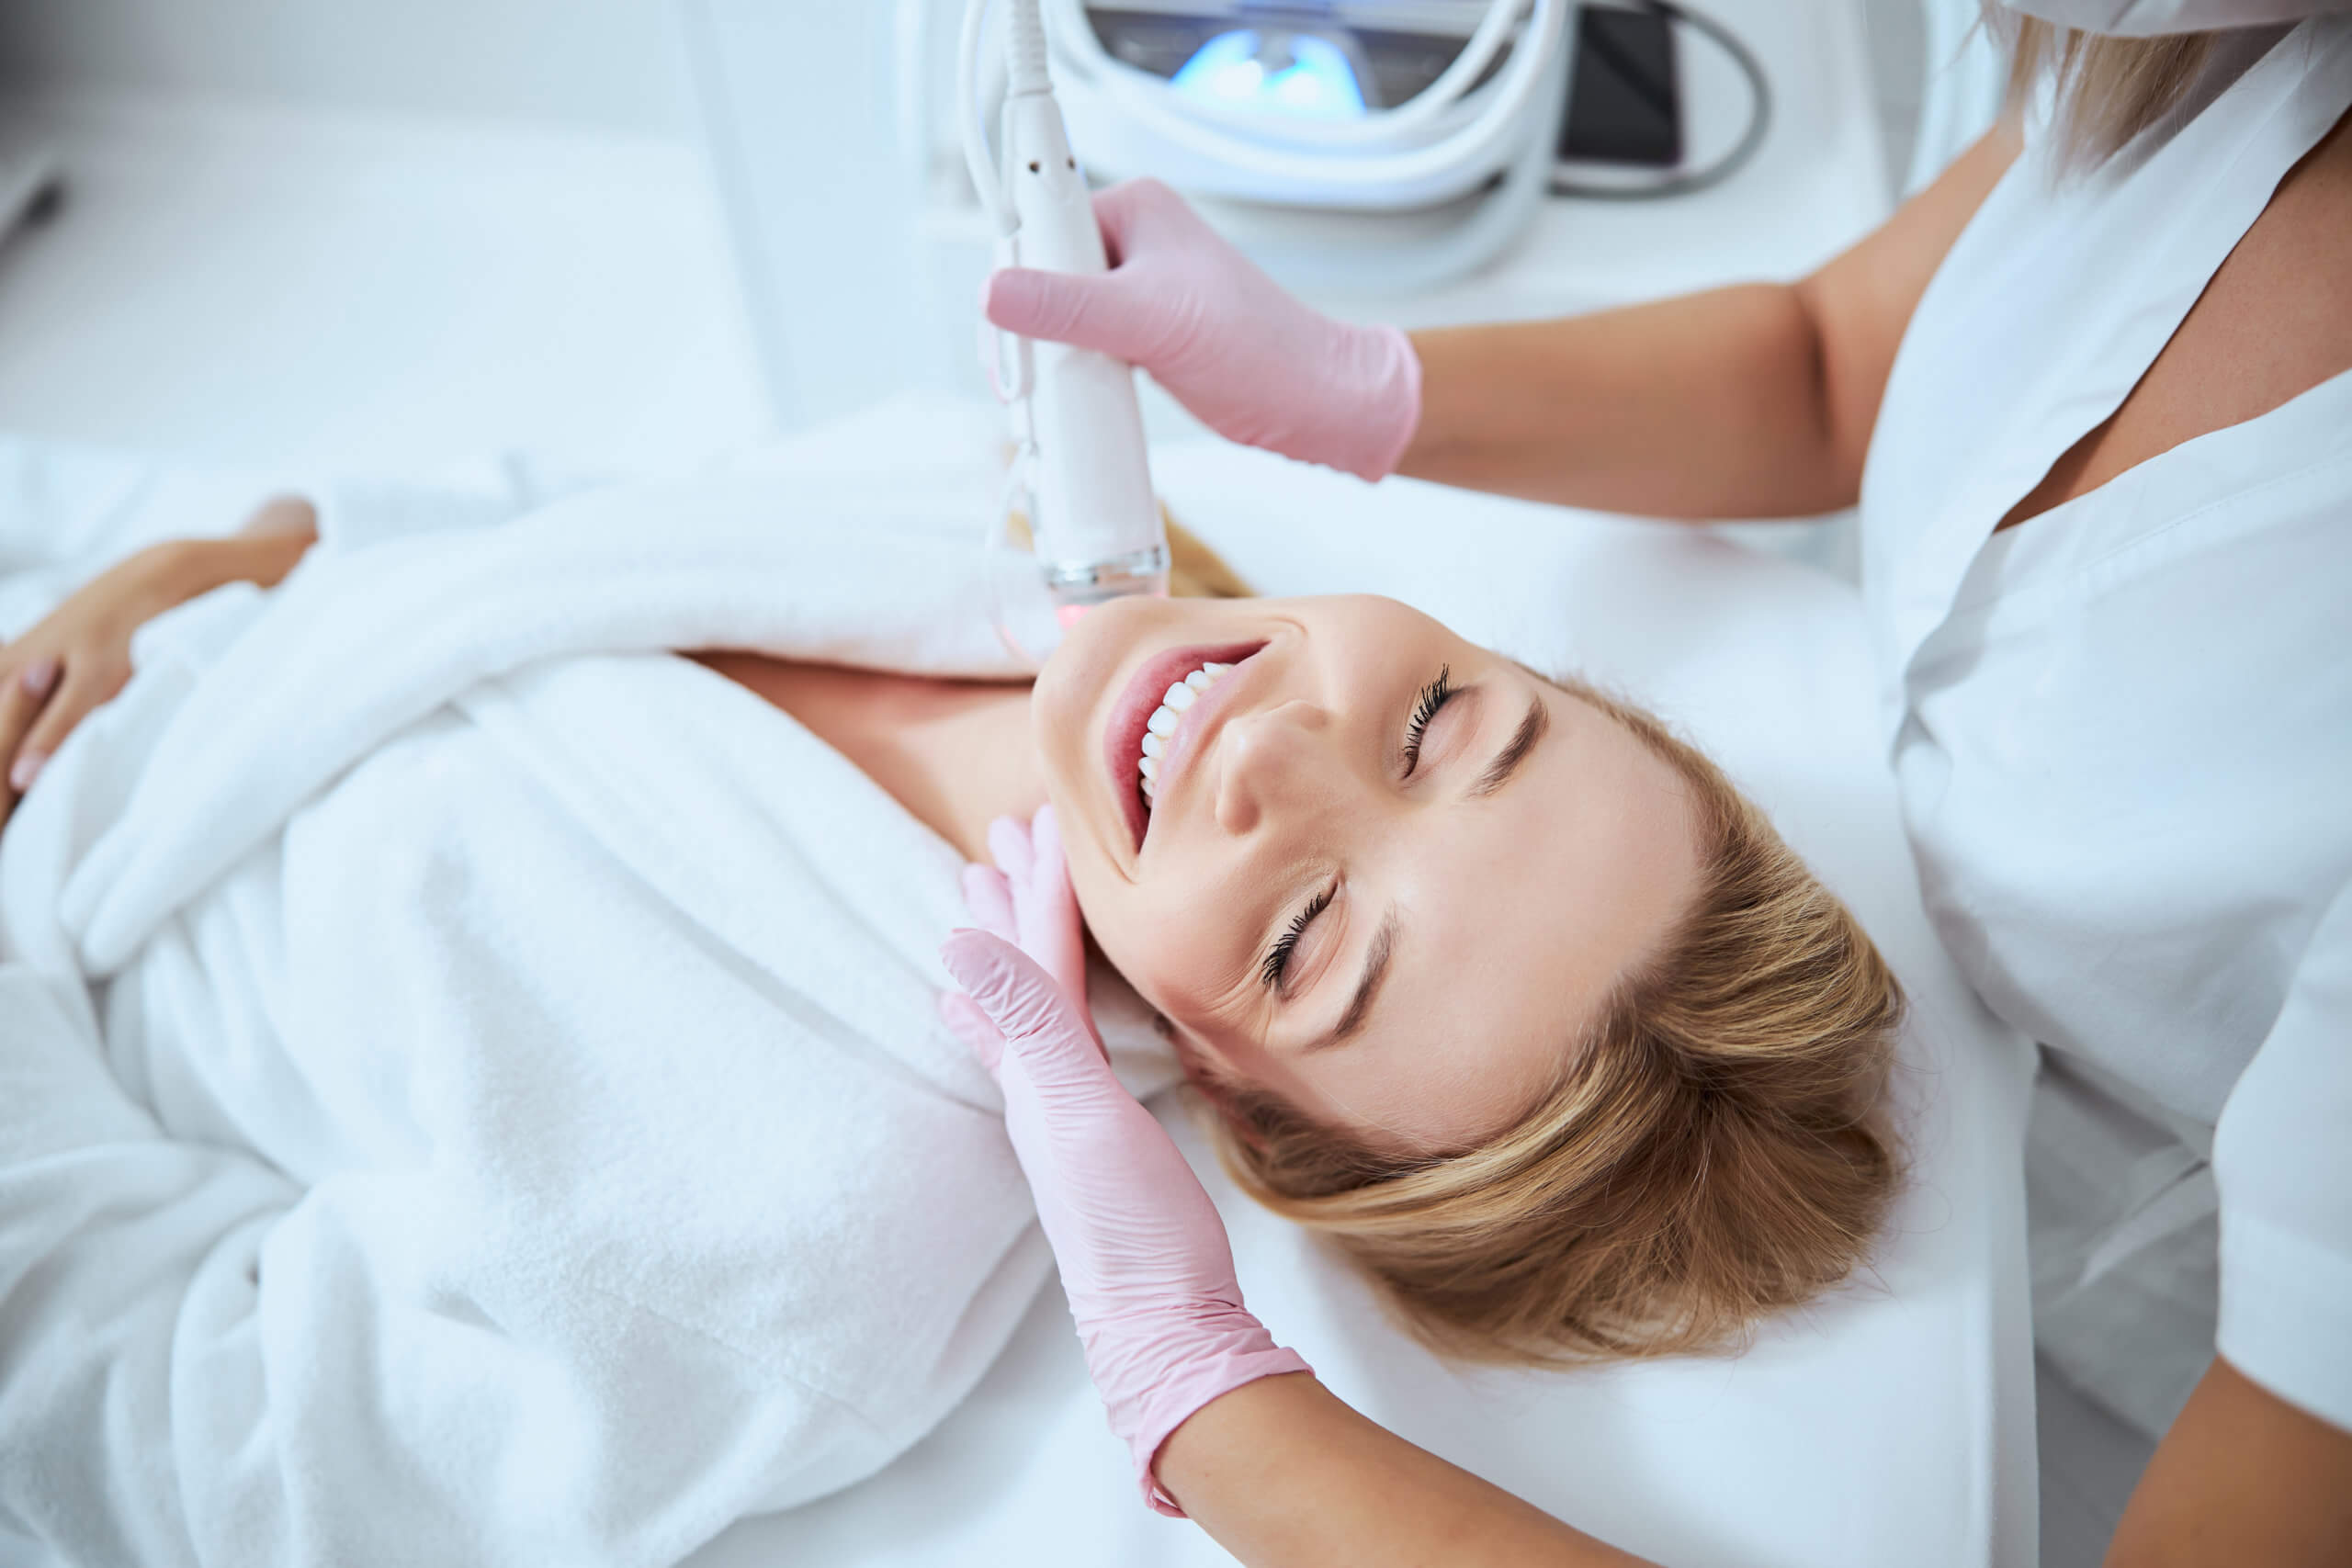 What Does Microneedling Do For Your Skin?